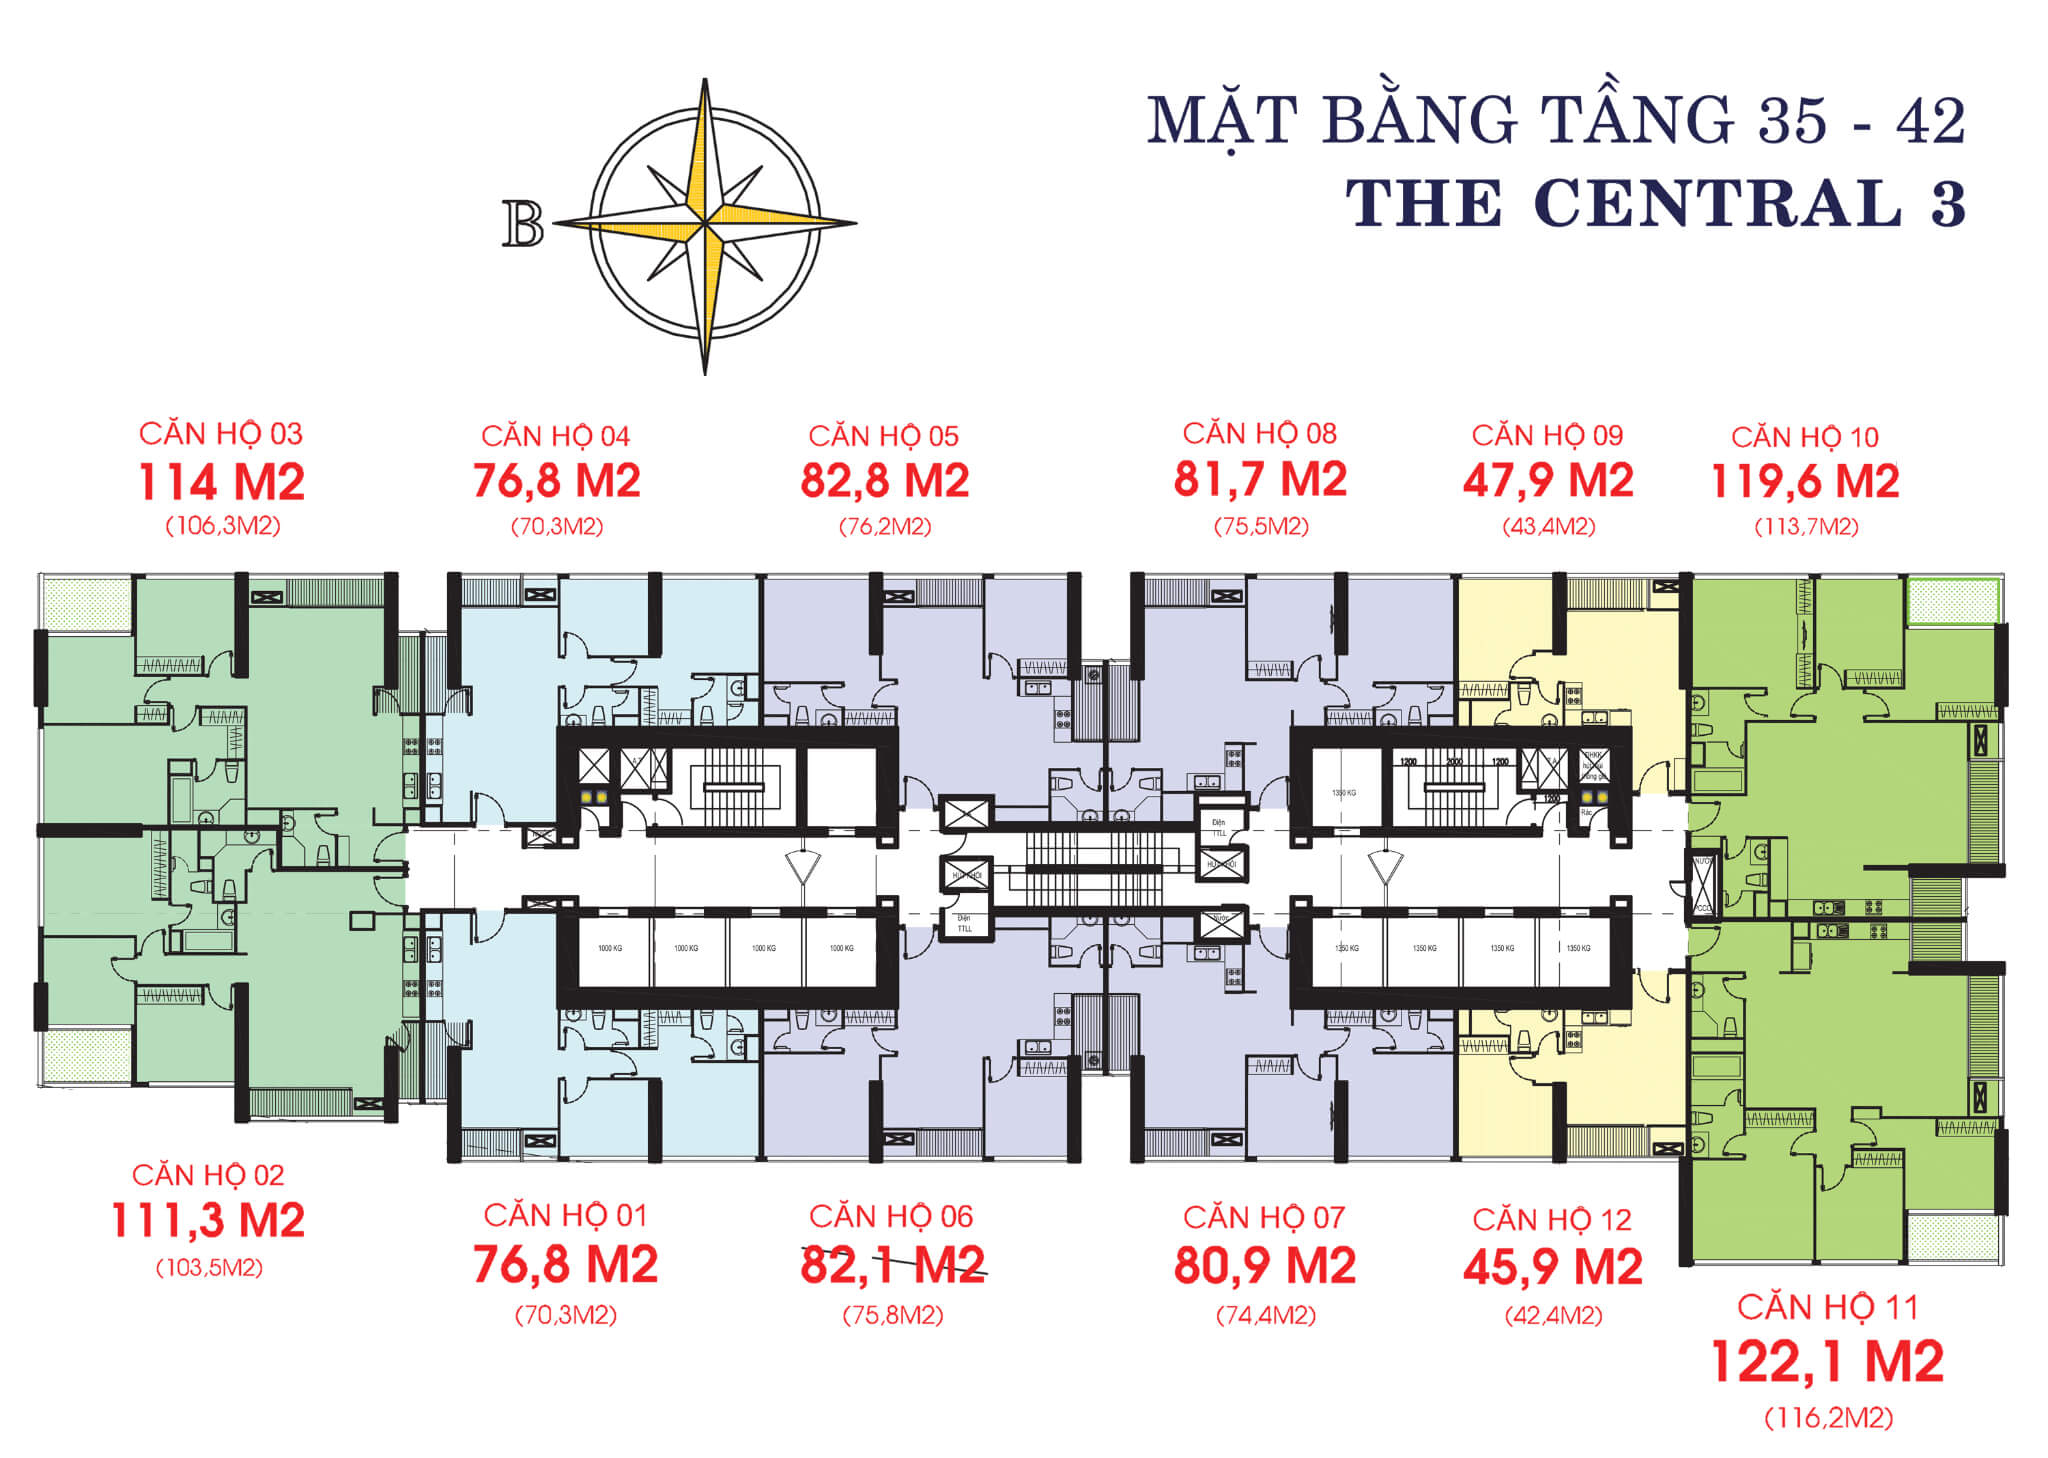 Mặt bằng layout tòa The Central 3 tầng 35-42 tại Vinhomes Central Park